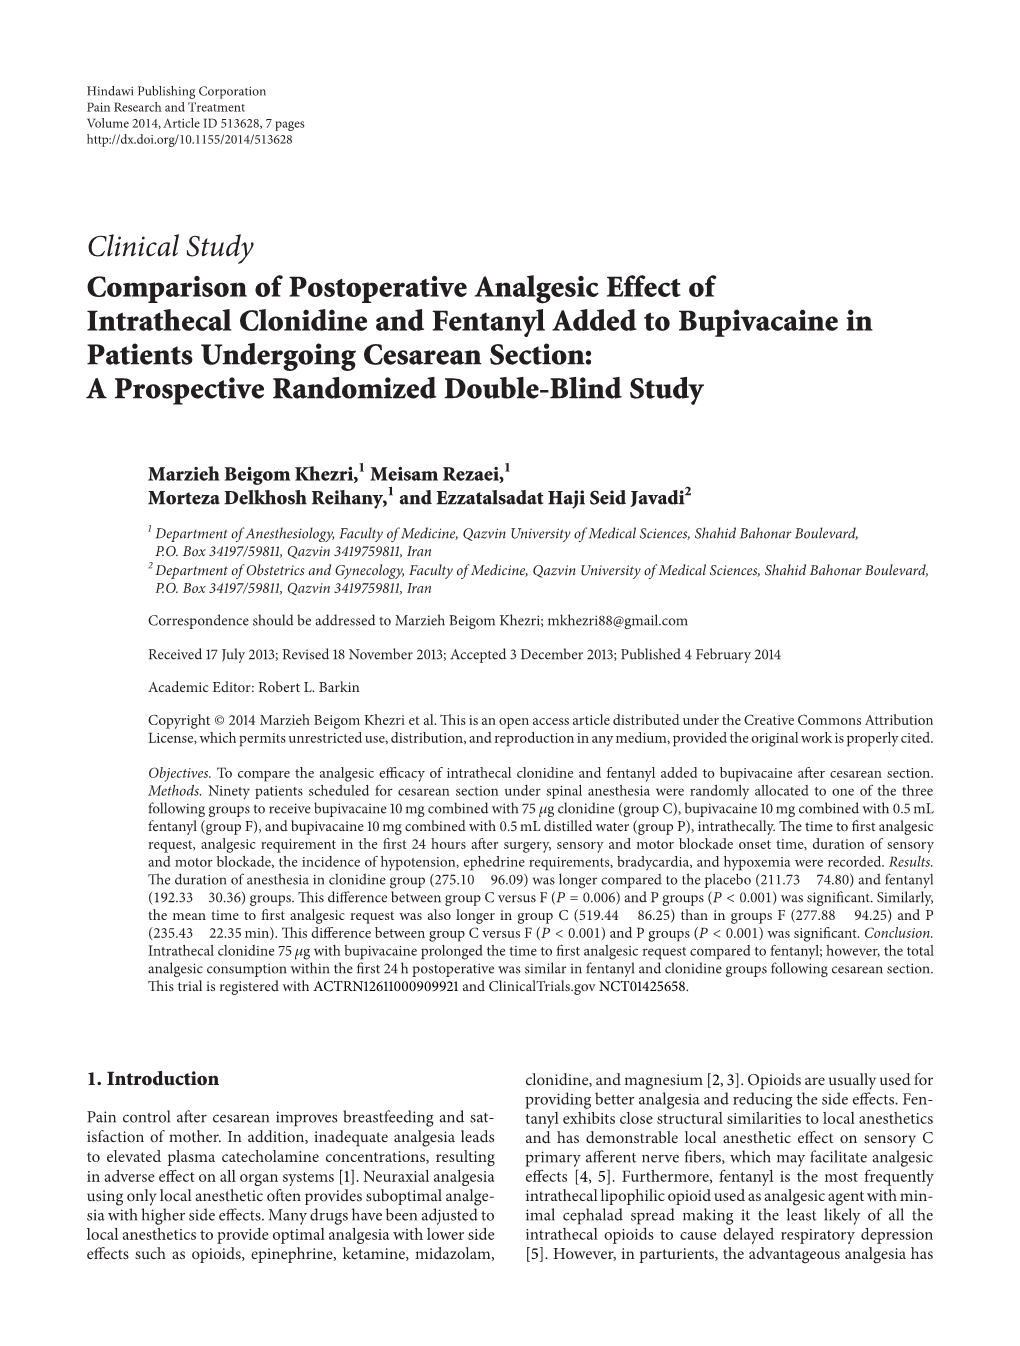 Clinical Study Comparison of Postoperative Analgesic Effect Of